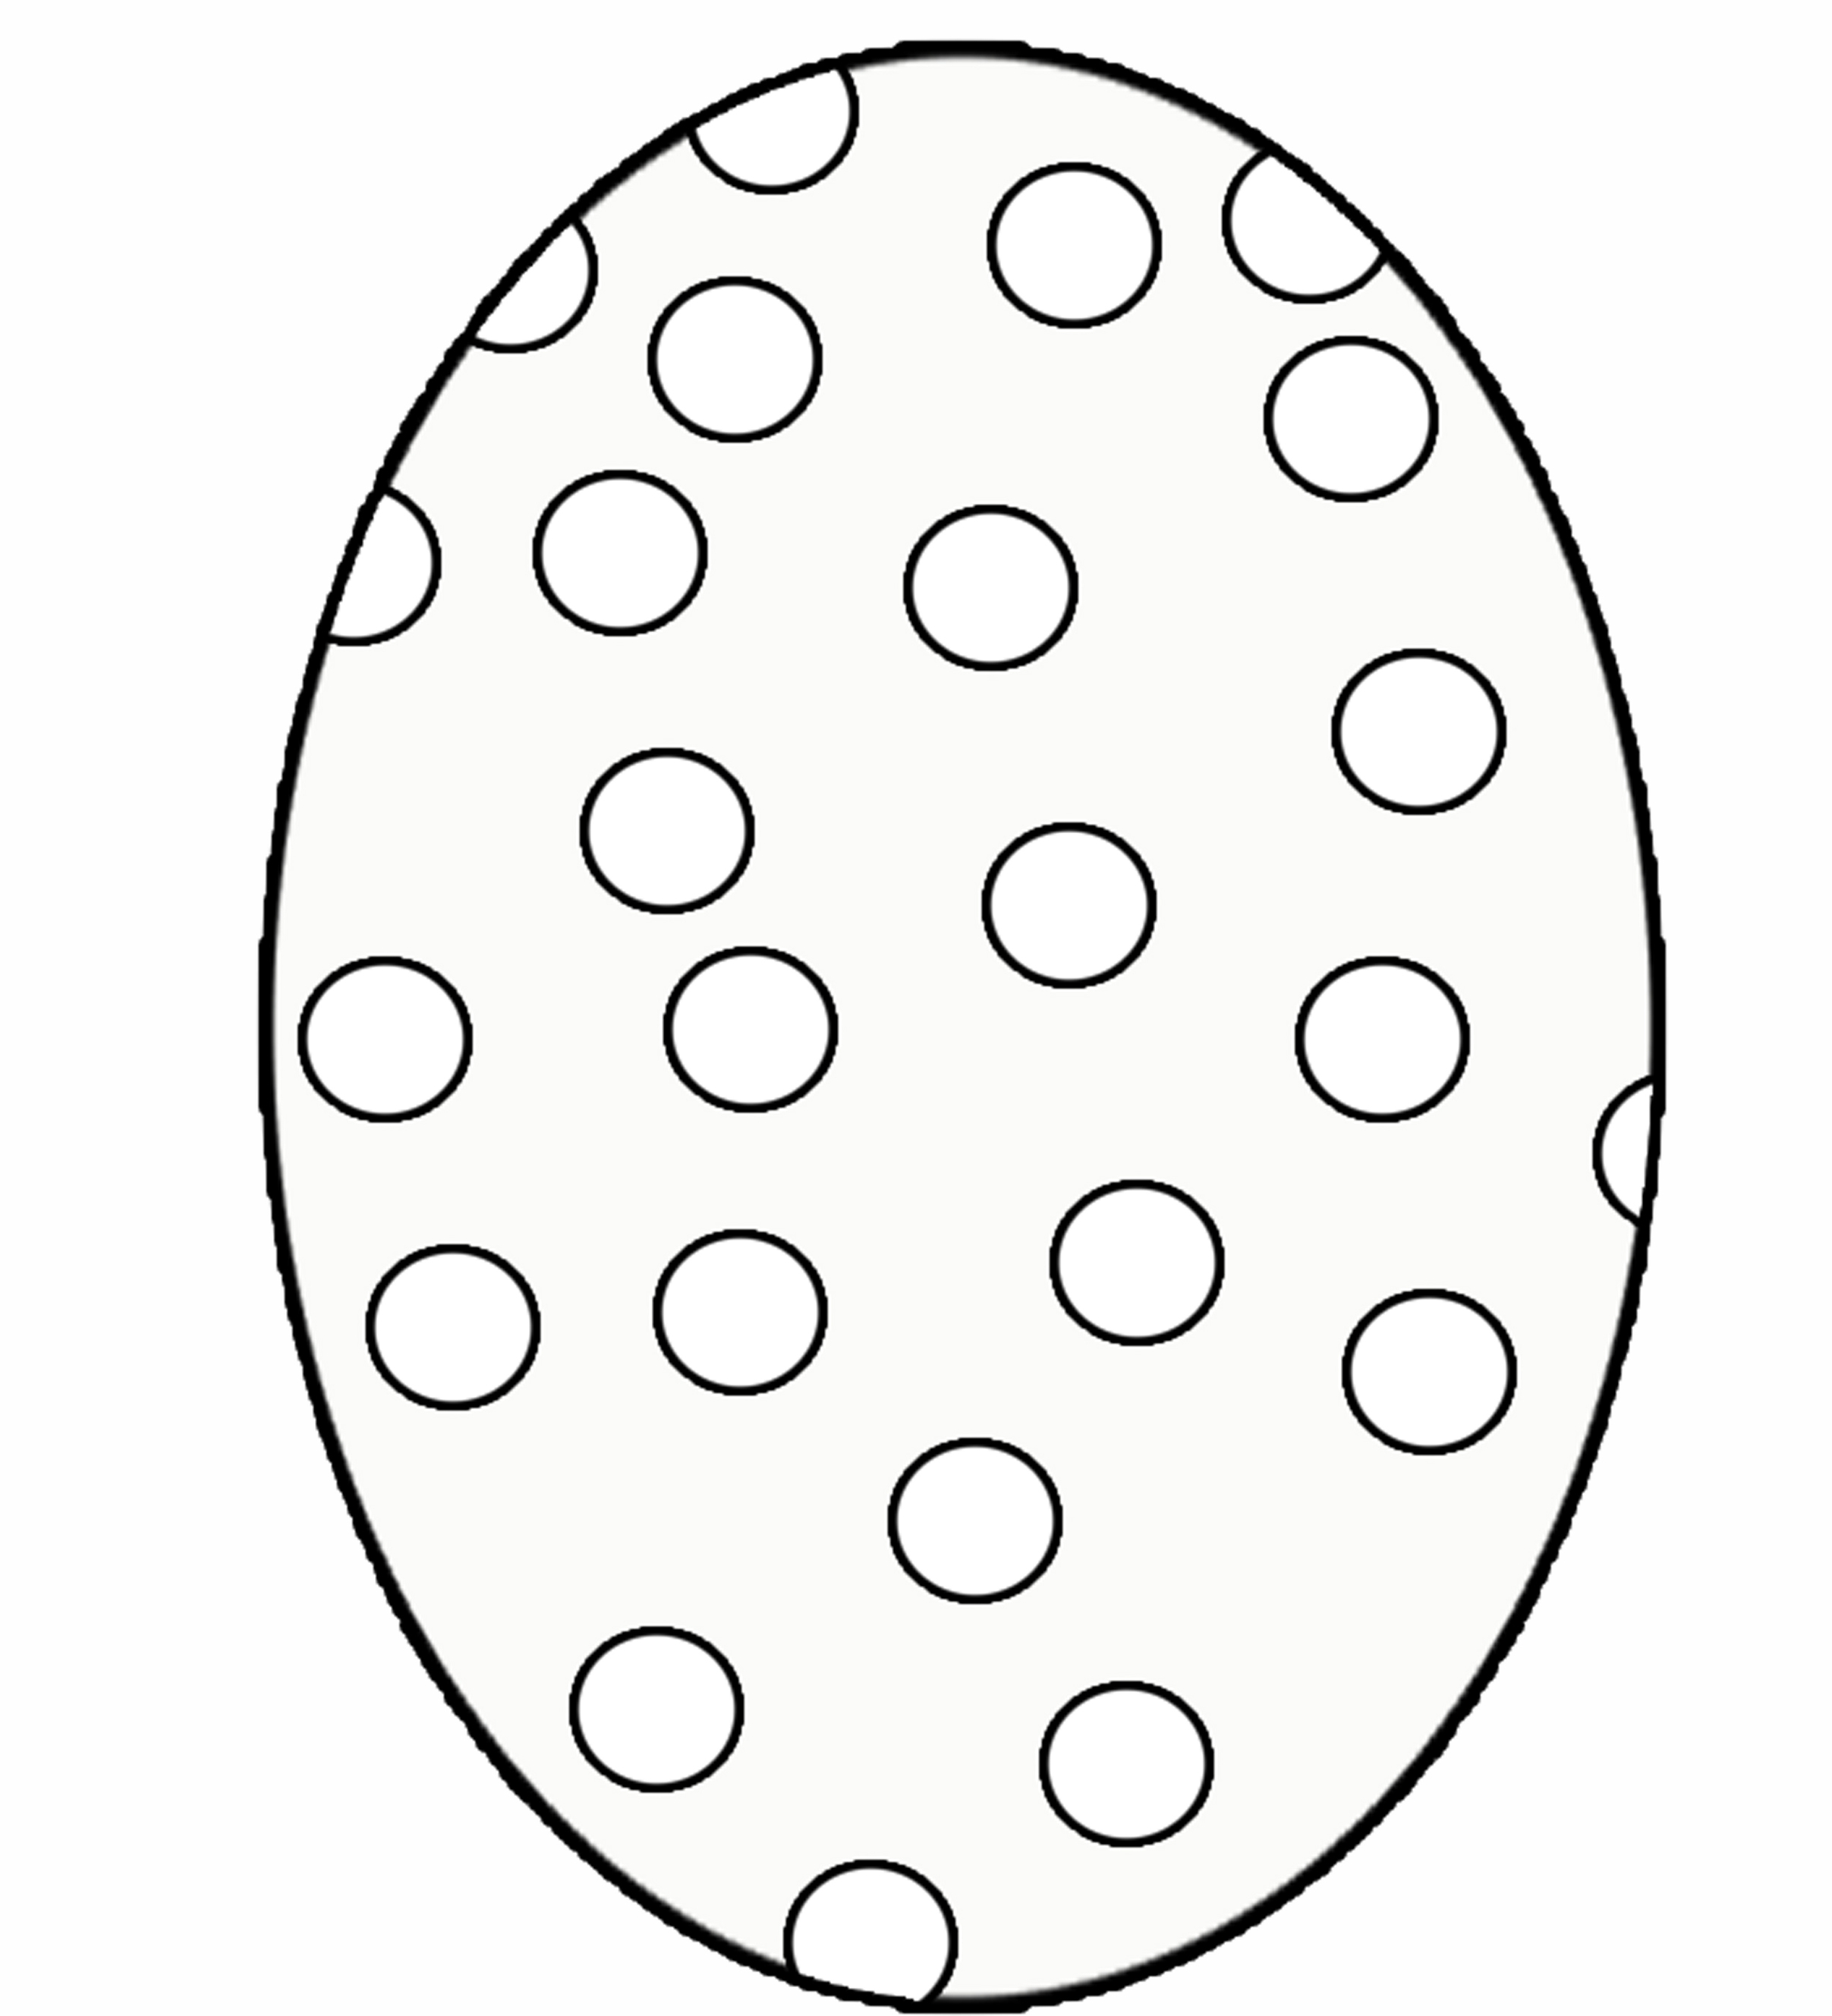 Plain Egg Template Clipart - Free to use Clip Art Resource